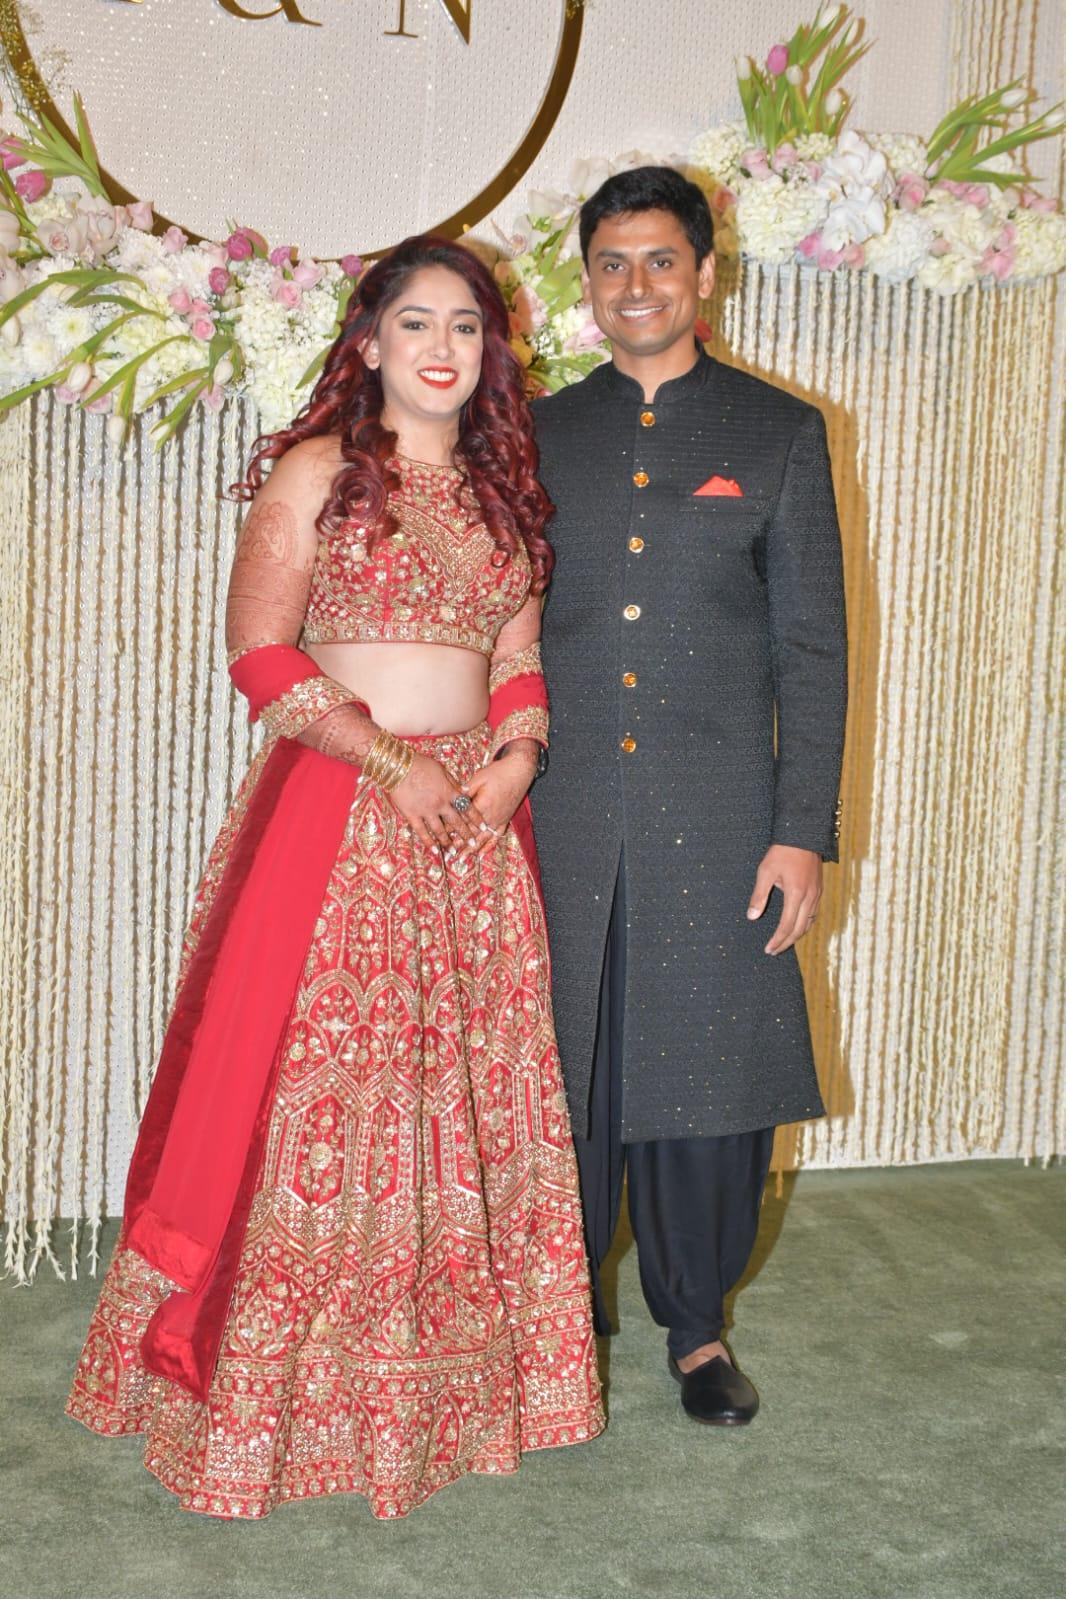 Ira Khan and Nupur Shikhare, looking absolutely stunning in their reception outfits. Ira, in a red lehenga, exudes a princess vibe straight out of a Disney movie, while Nupur, dressed in a black sherwani, resembles a handsome prince